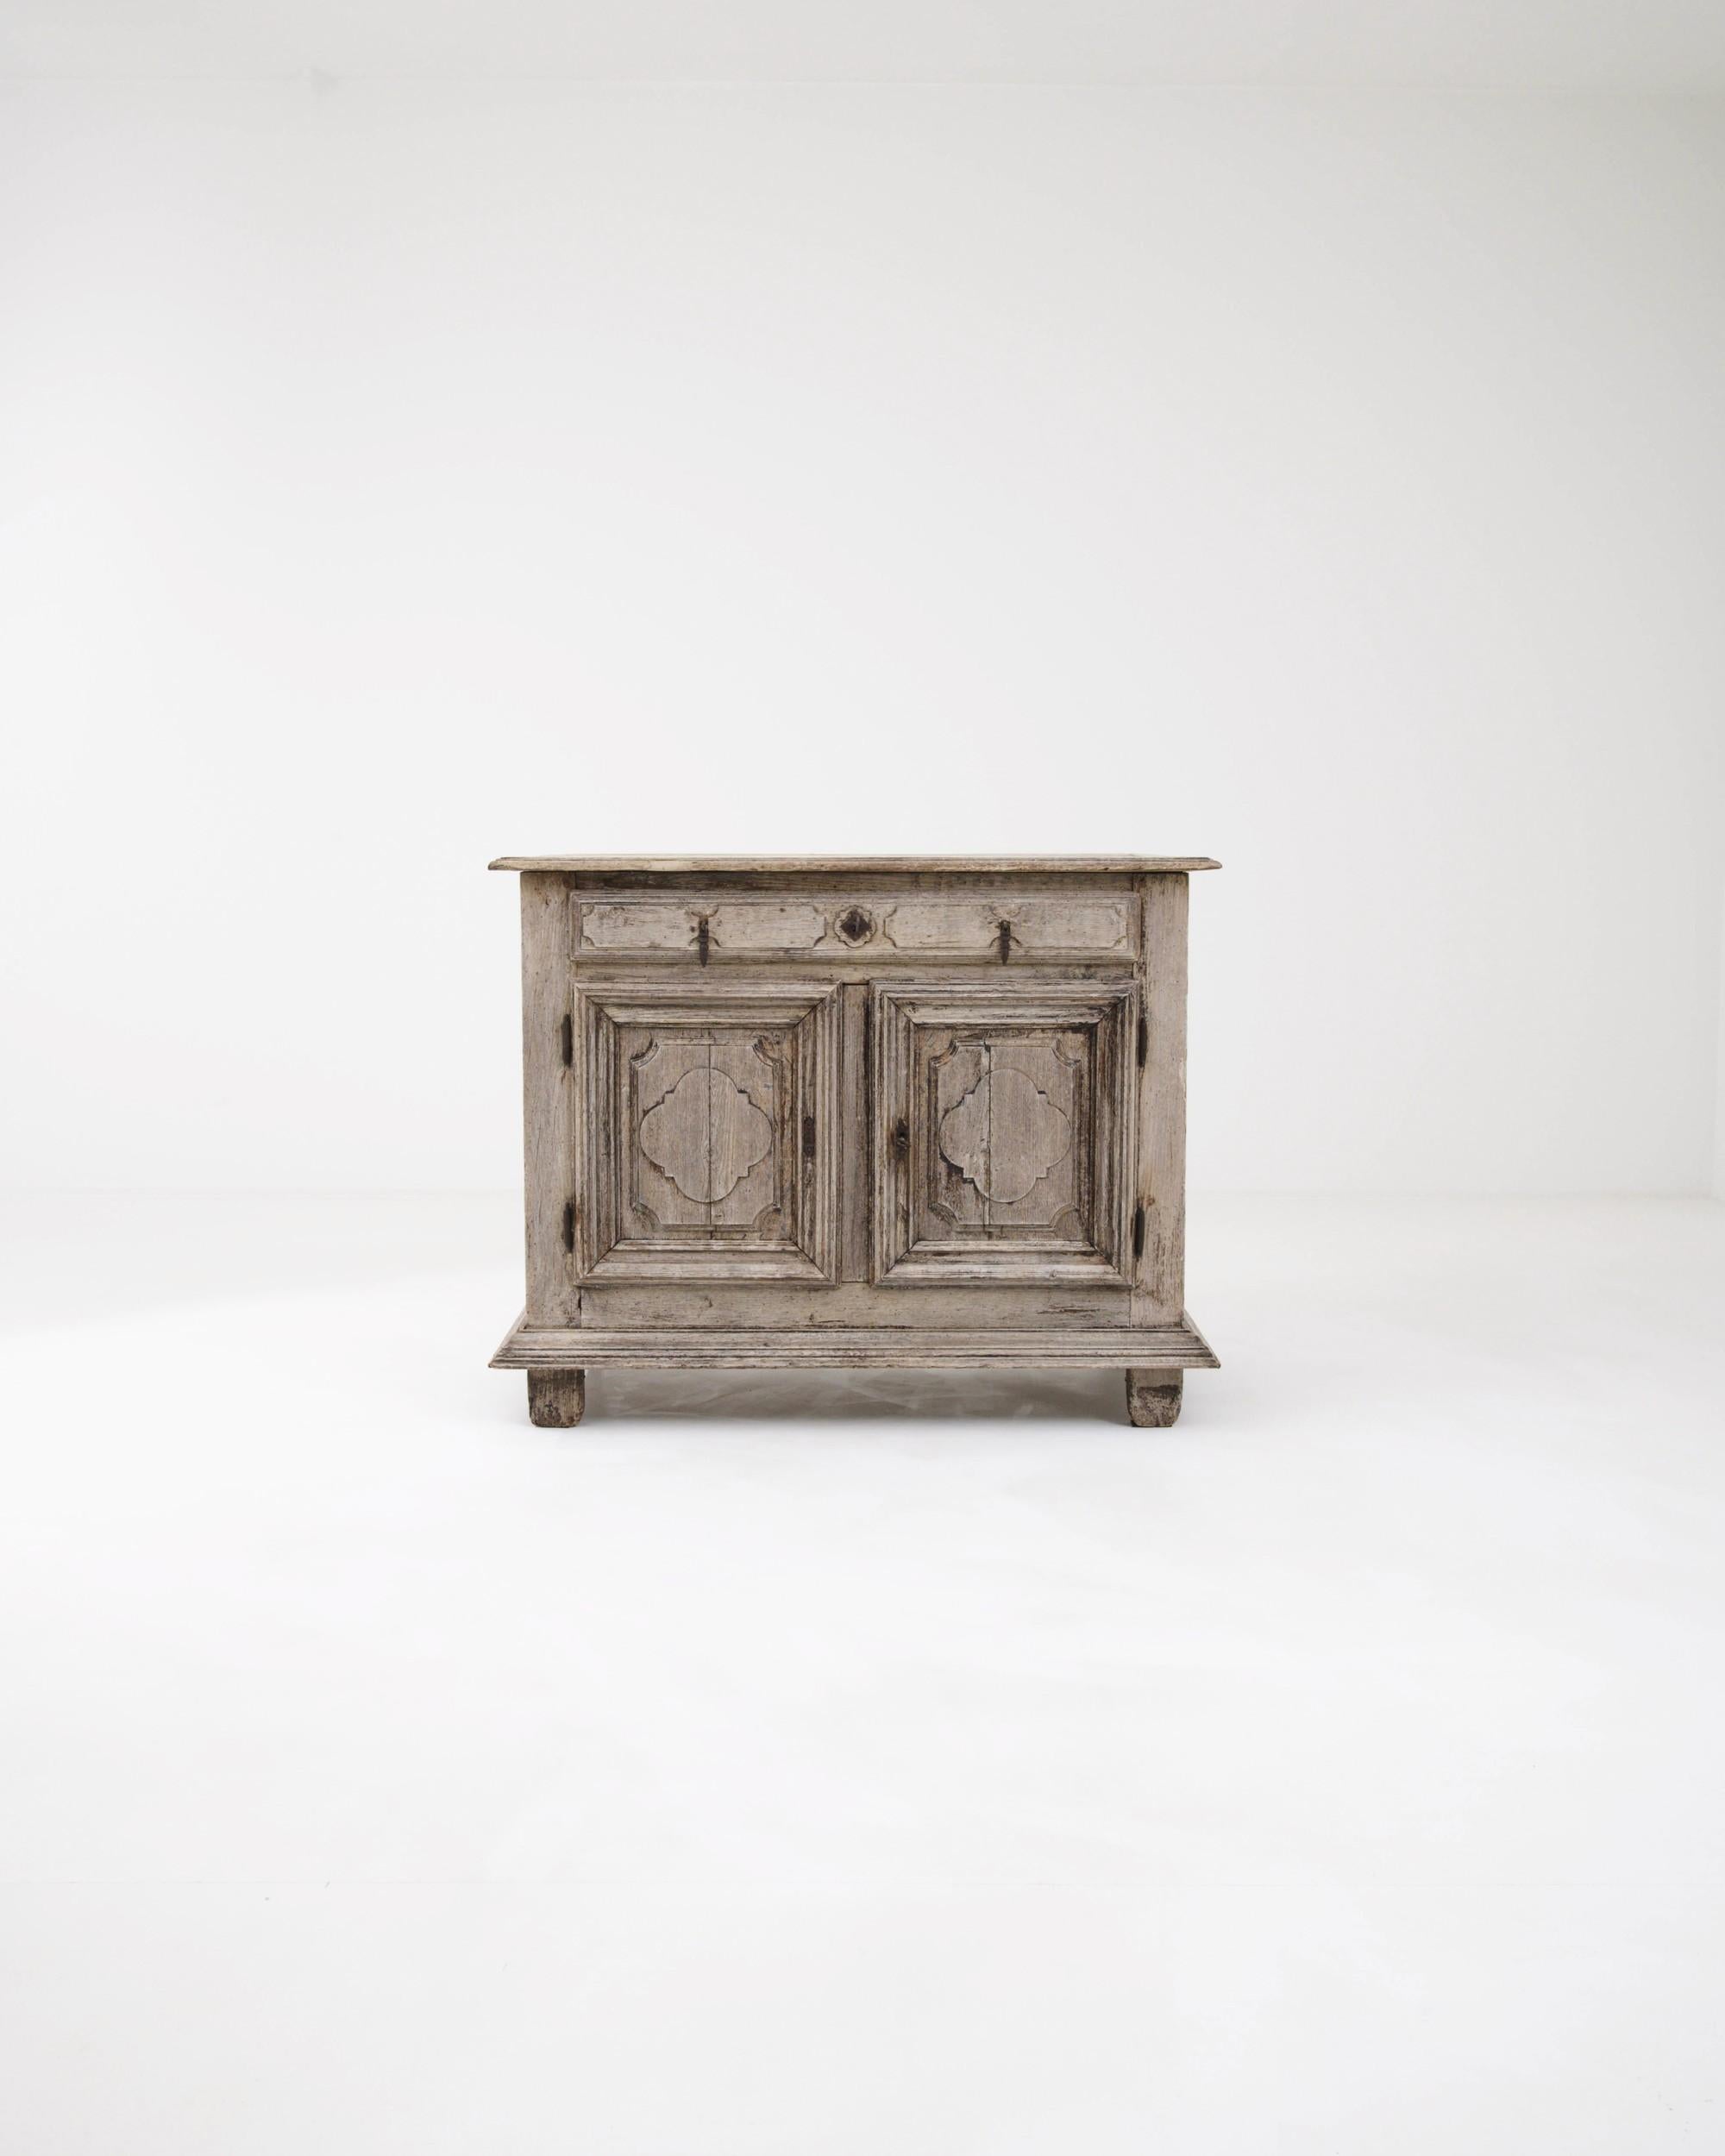 Ornamental accents give this Provincial oak buffet a uniquely charming personality. Hand-crafted in France in the 1800s, the silhouette is simple, providing ample space to store the humble items of a country household. The deep relief of the